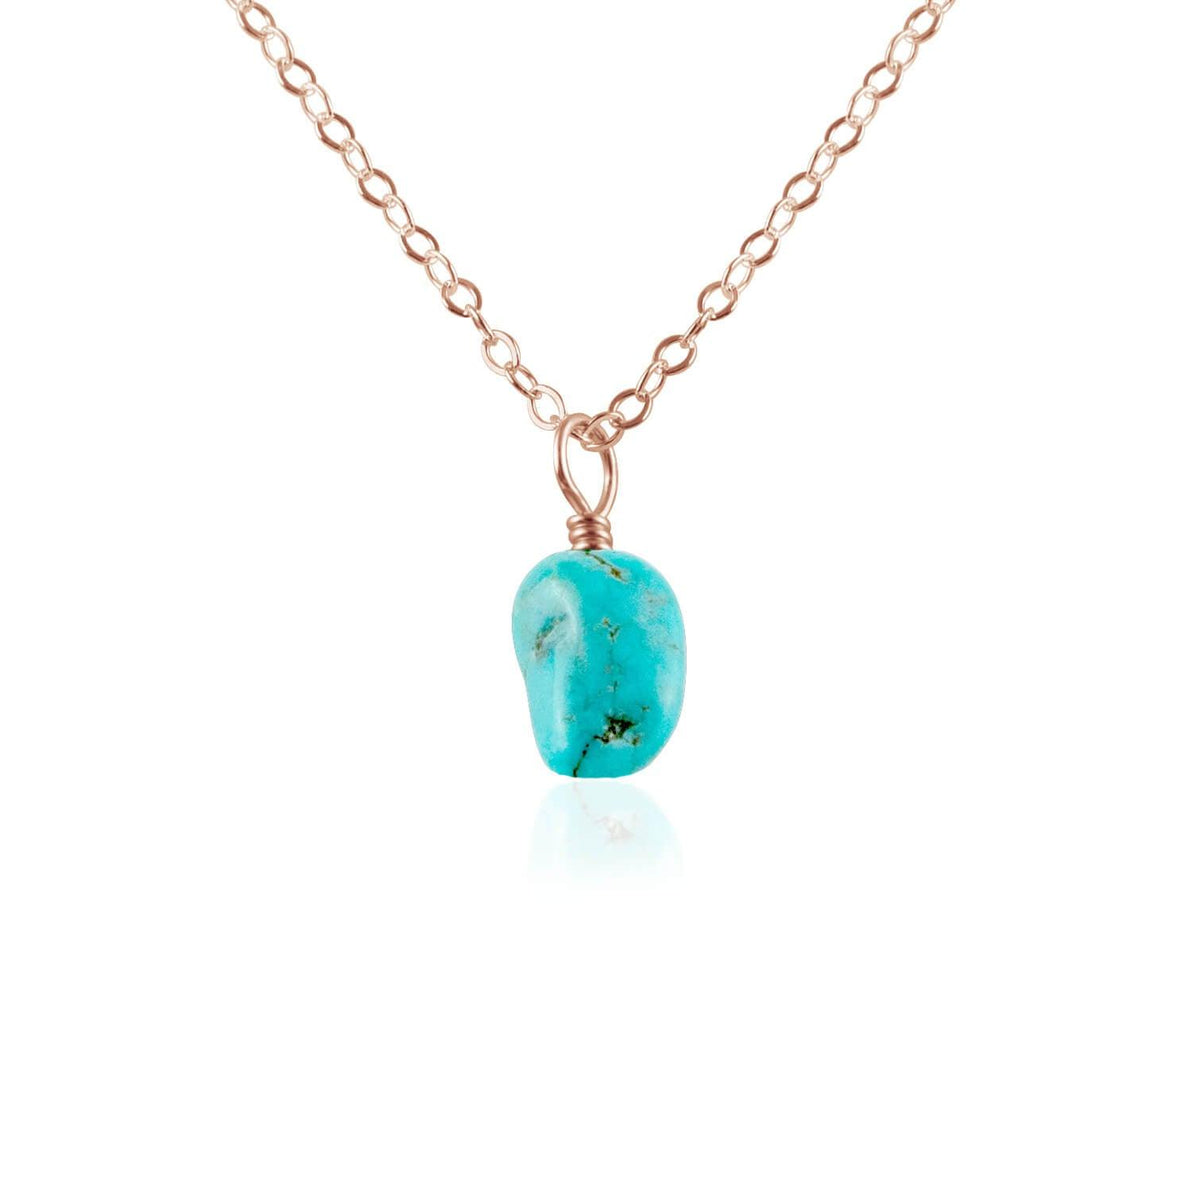 Raw Crystal Pendant Necklace - Turquoise - 14K Rose Gold Fill - Luna Tide Handmade Jewellery